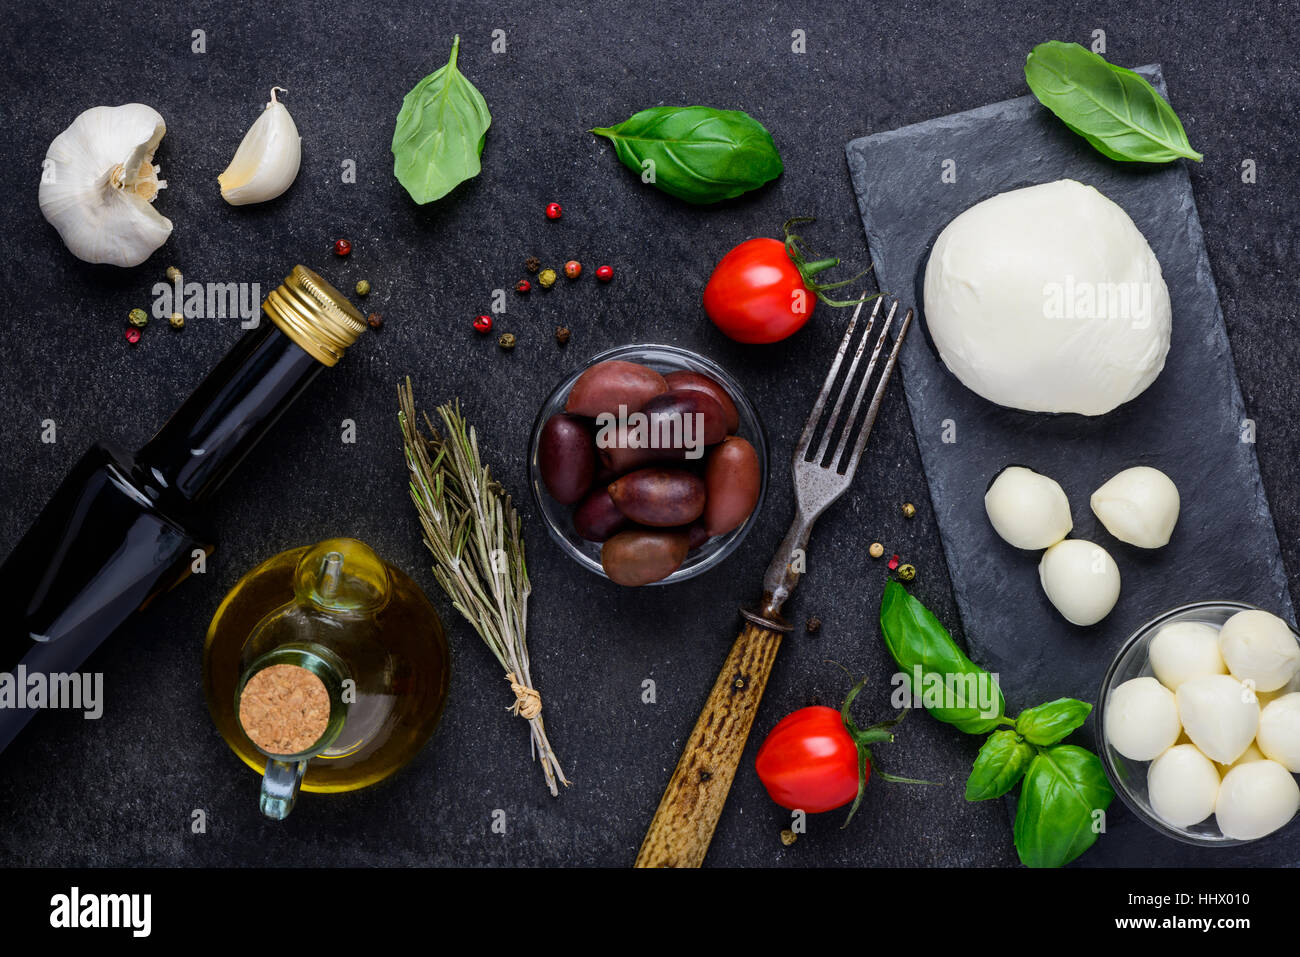 Cooking ingredients and Mozzarella cheese balls with basil tomato and seasoning Stock Photo